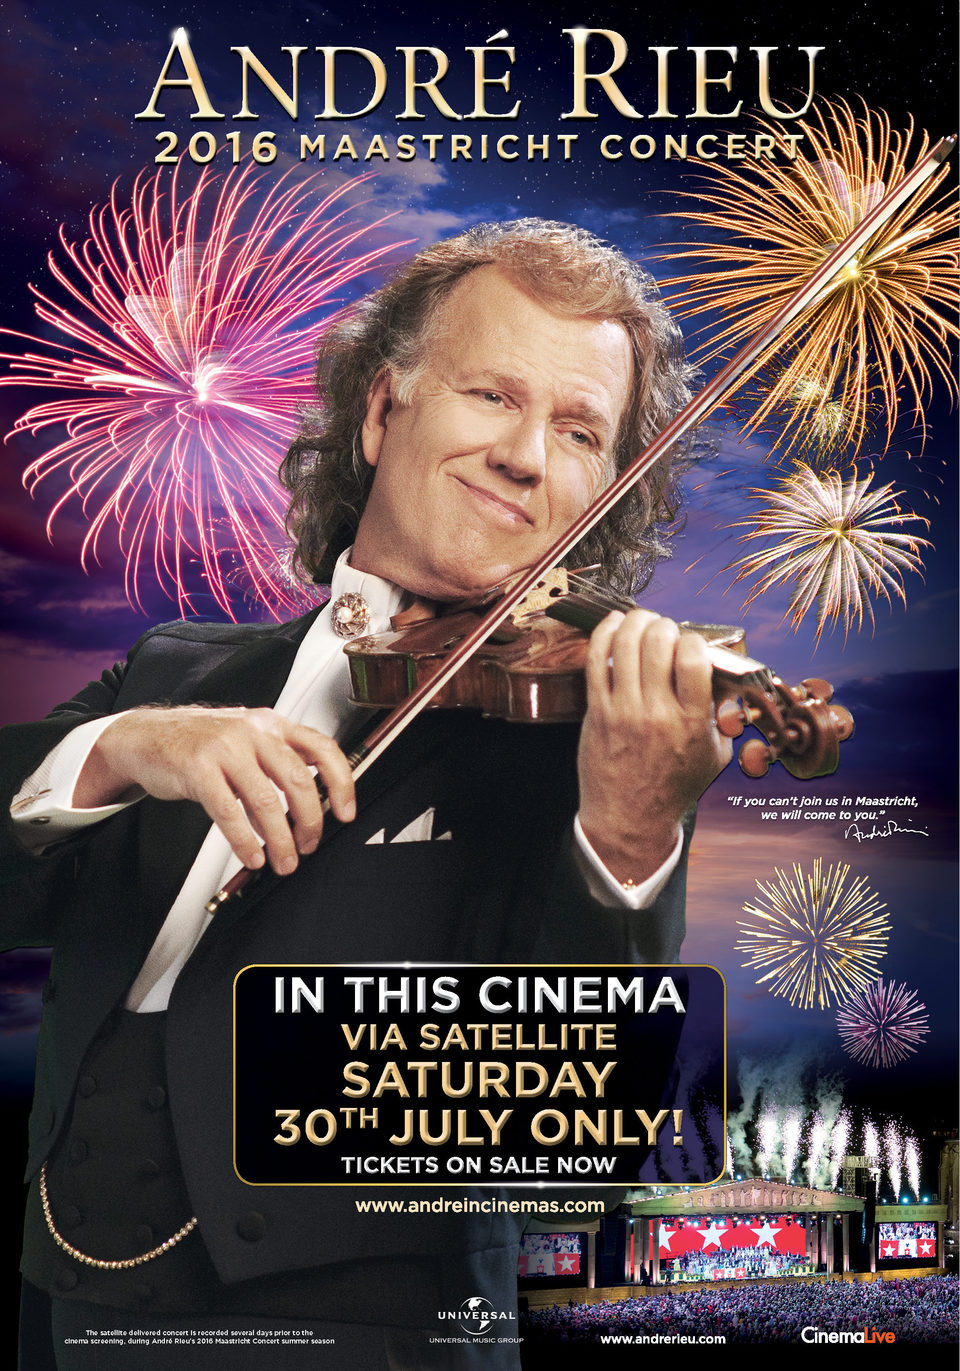 Poster of Andre Rieu's 2016 Maastricht Concert - Reino Unido